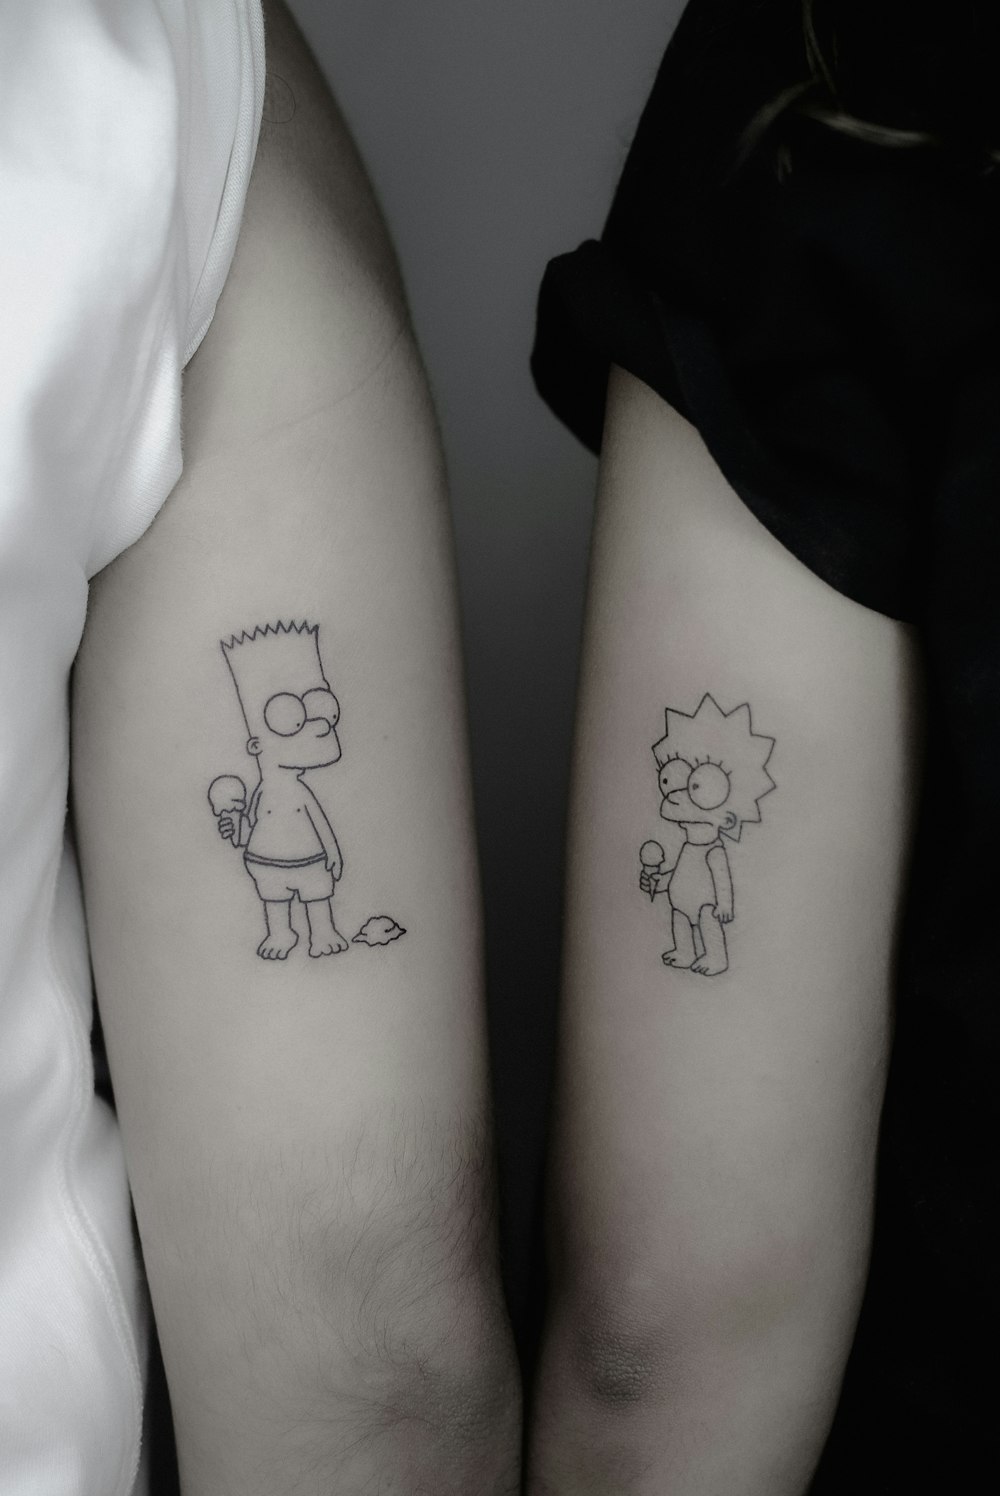 a couple of people with tattoos on their arms